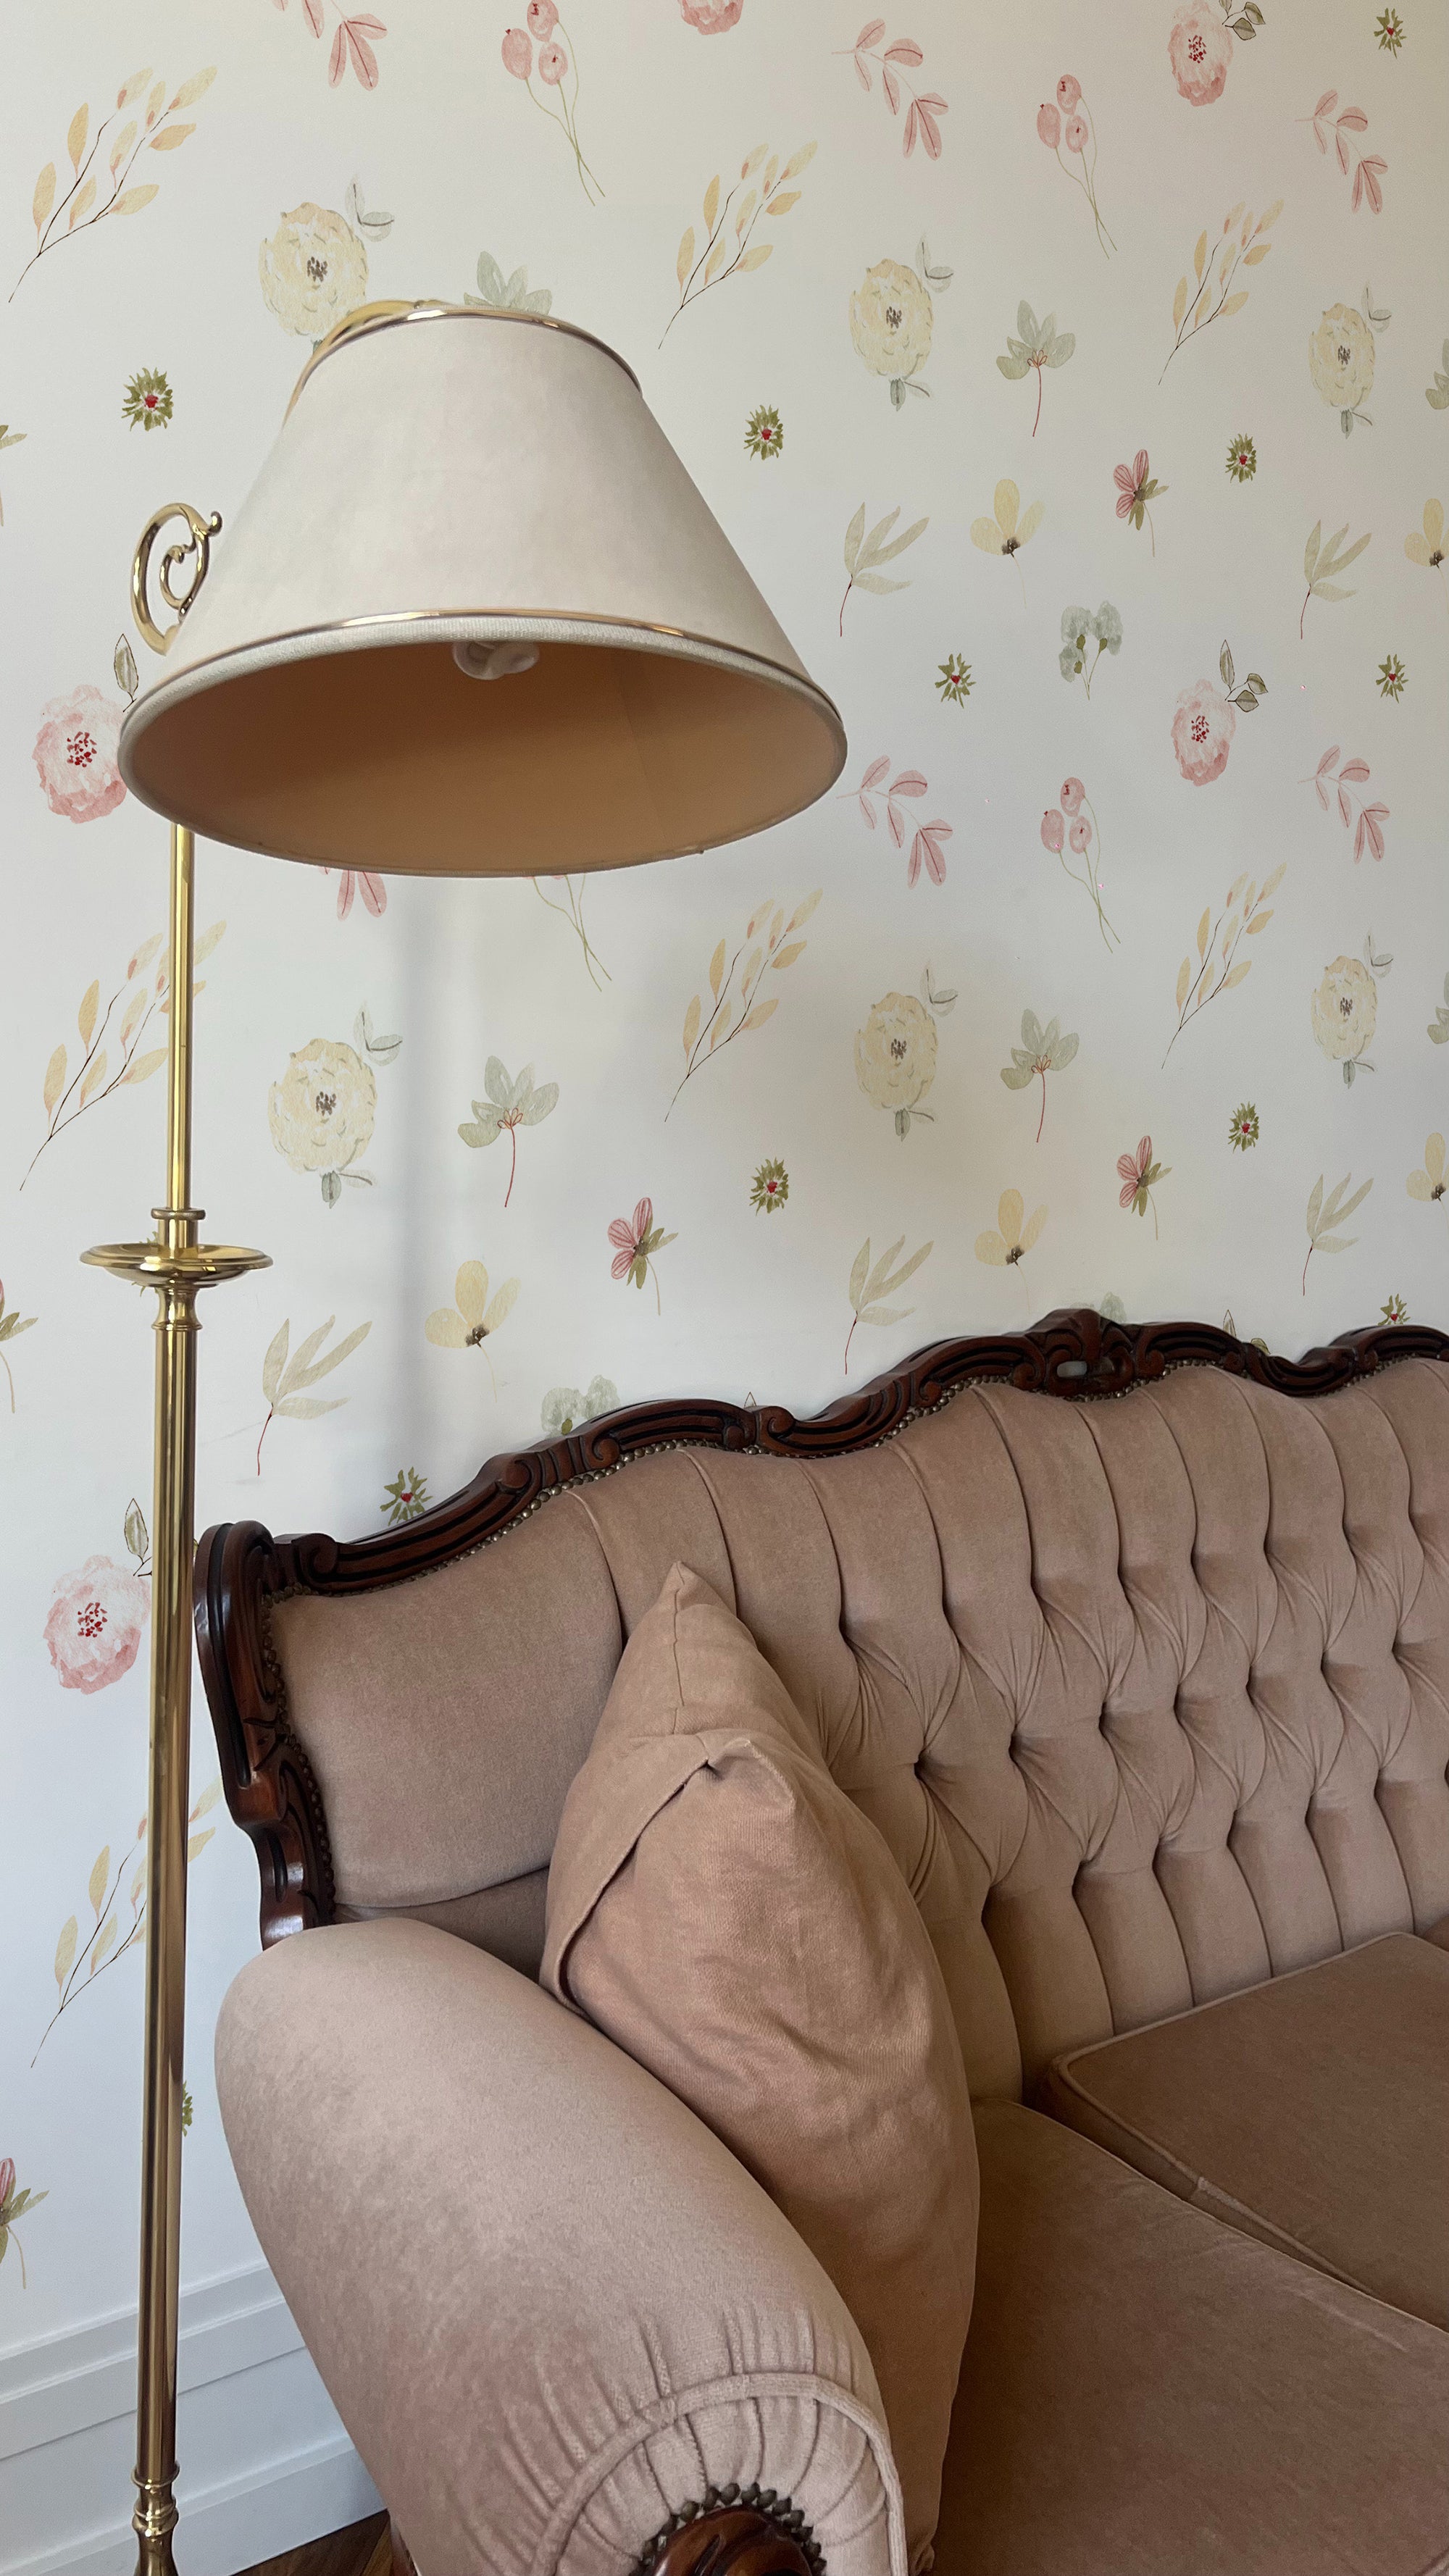 A classic living room corner, graced with the Pink Watercolour Floral Wallpaper featuring delicate hand-painted flowers in soft pink hues. The wallpaper adds a romantic touch behind a vintage tufted sofa, complemented by an elegant brass floor lamp that casts a warm glow, enhancing the room's inviting ambiance.